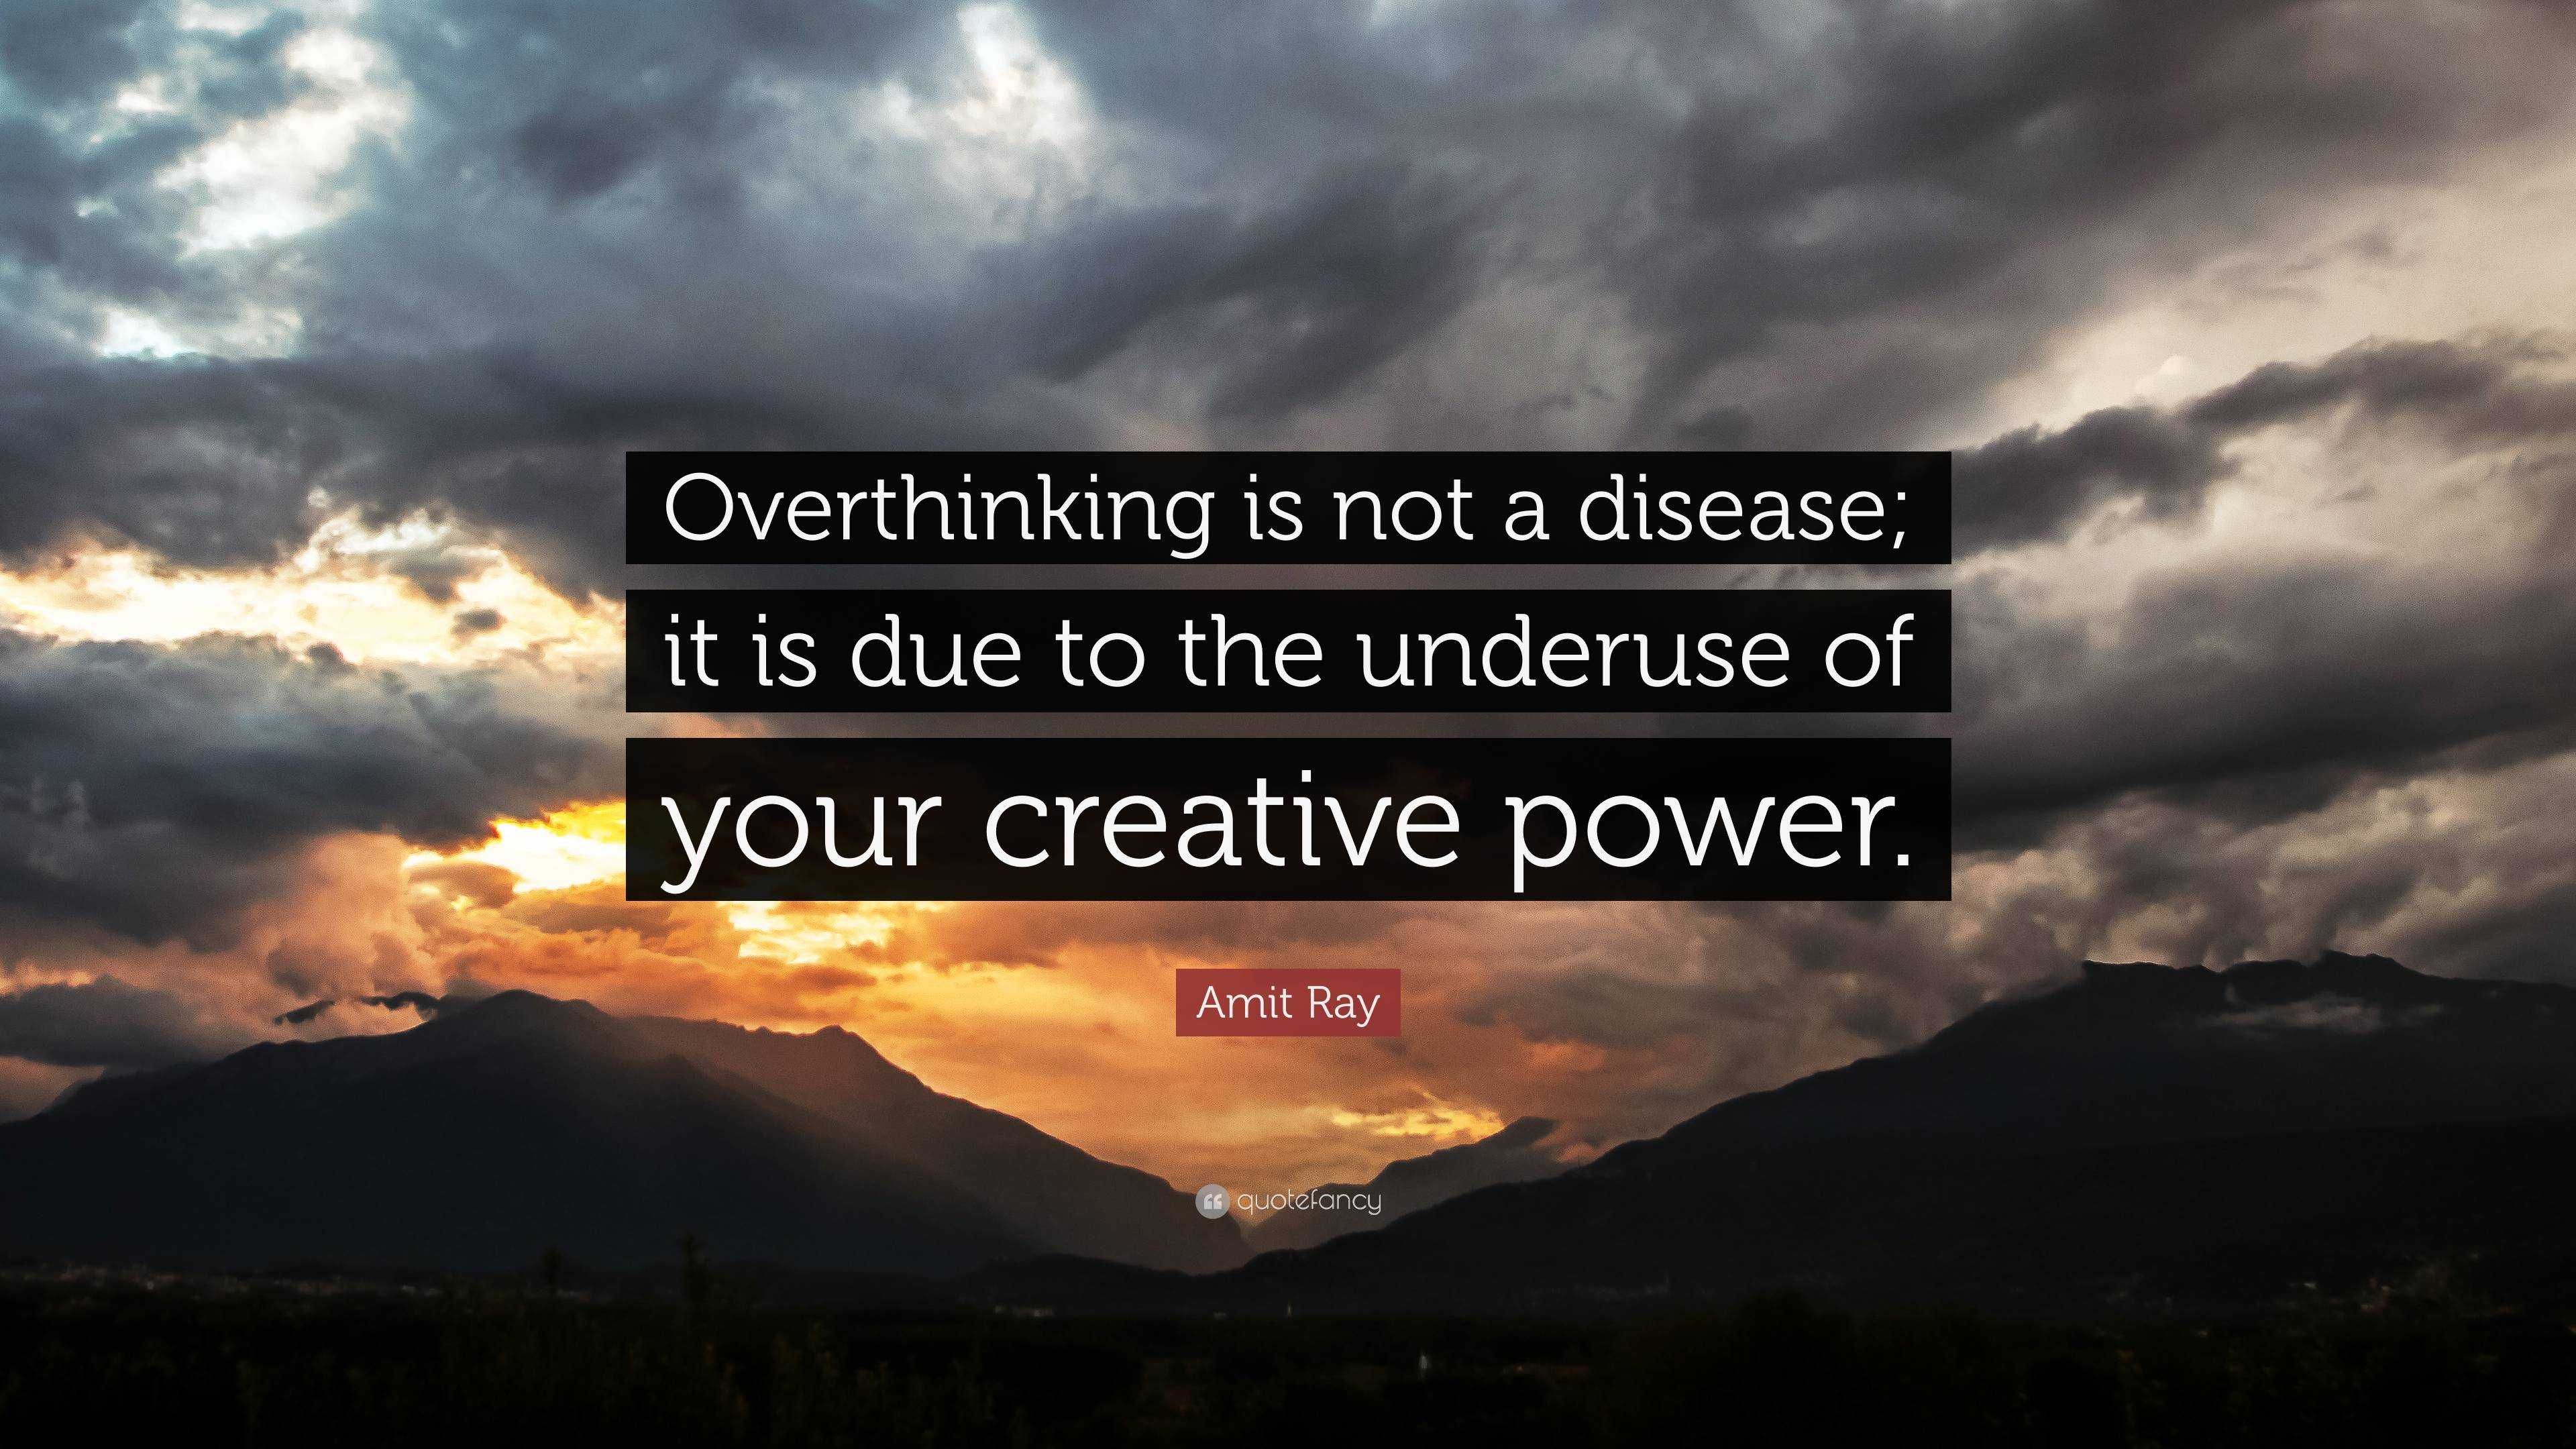 Overthinking quotes about not 20+ Overthinking